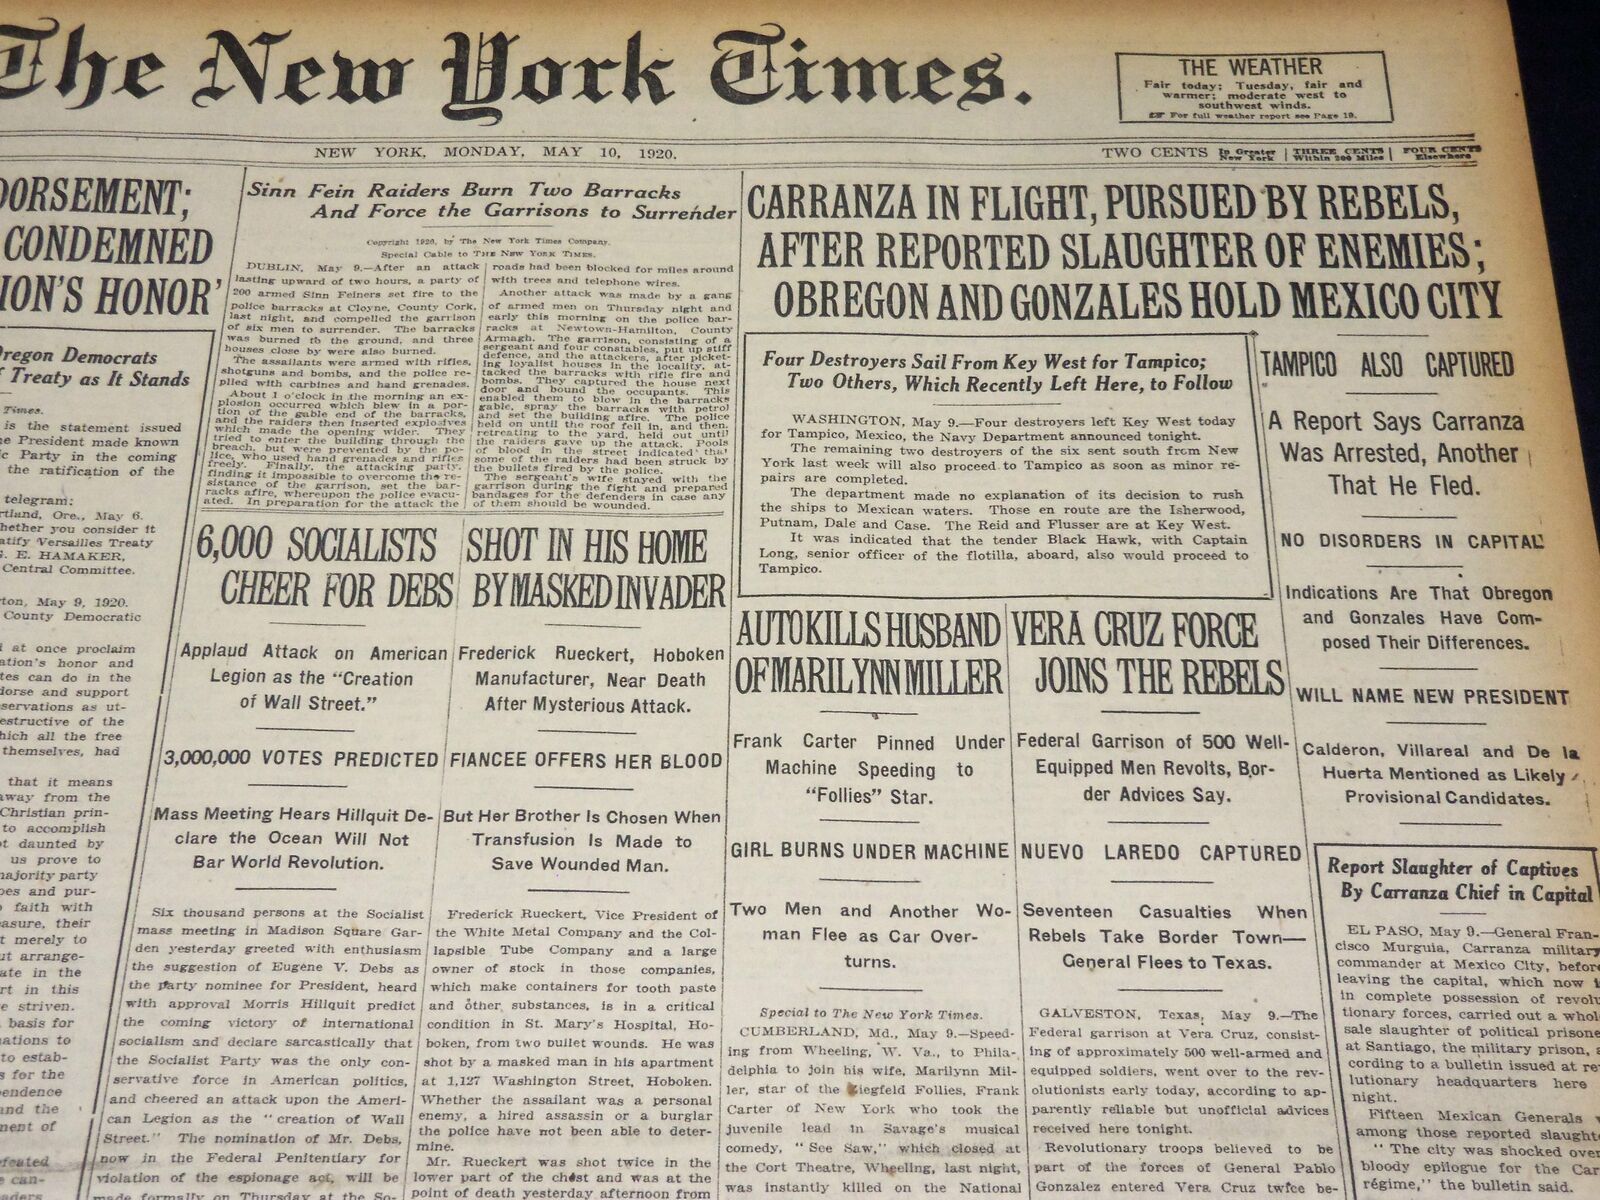 1920 MAY 10 NEW YORK TIMES NEWSPAPER - 6,000 SOCIALISTS CHEER DEBS - NT 8672